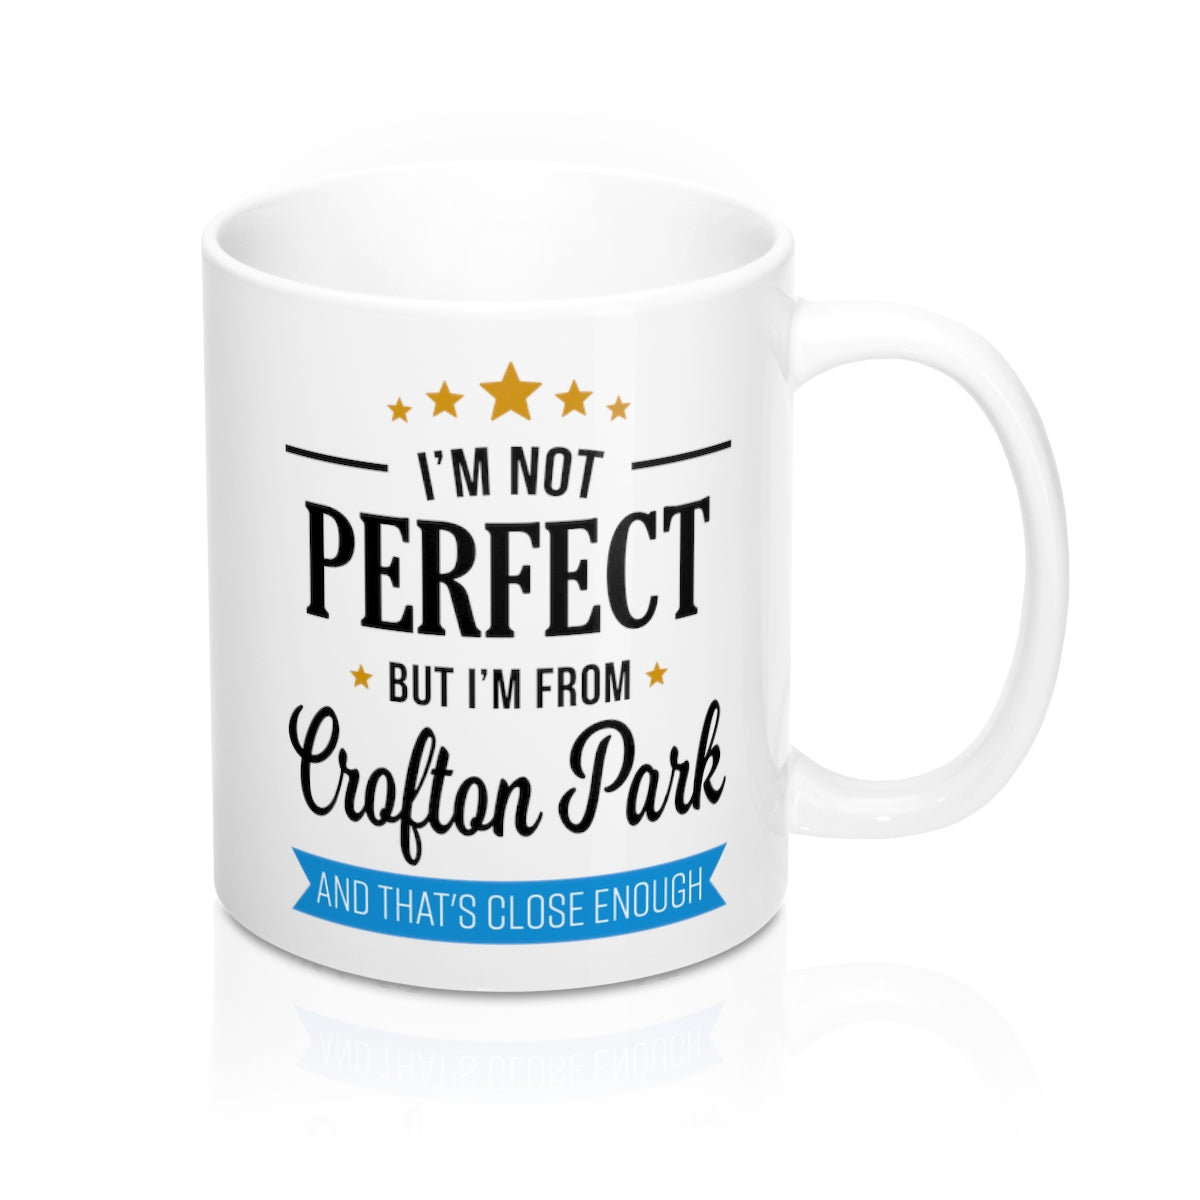 I'm Not Perfect But I'm From Crofton Park Mug